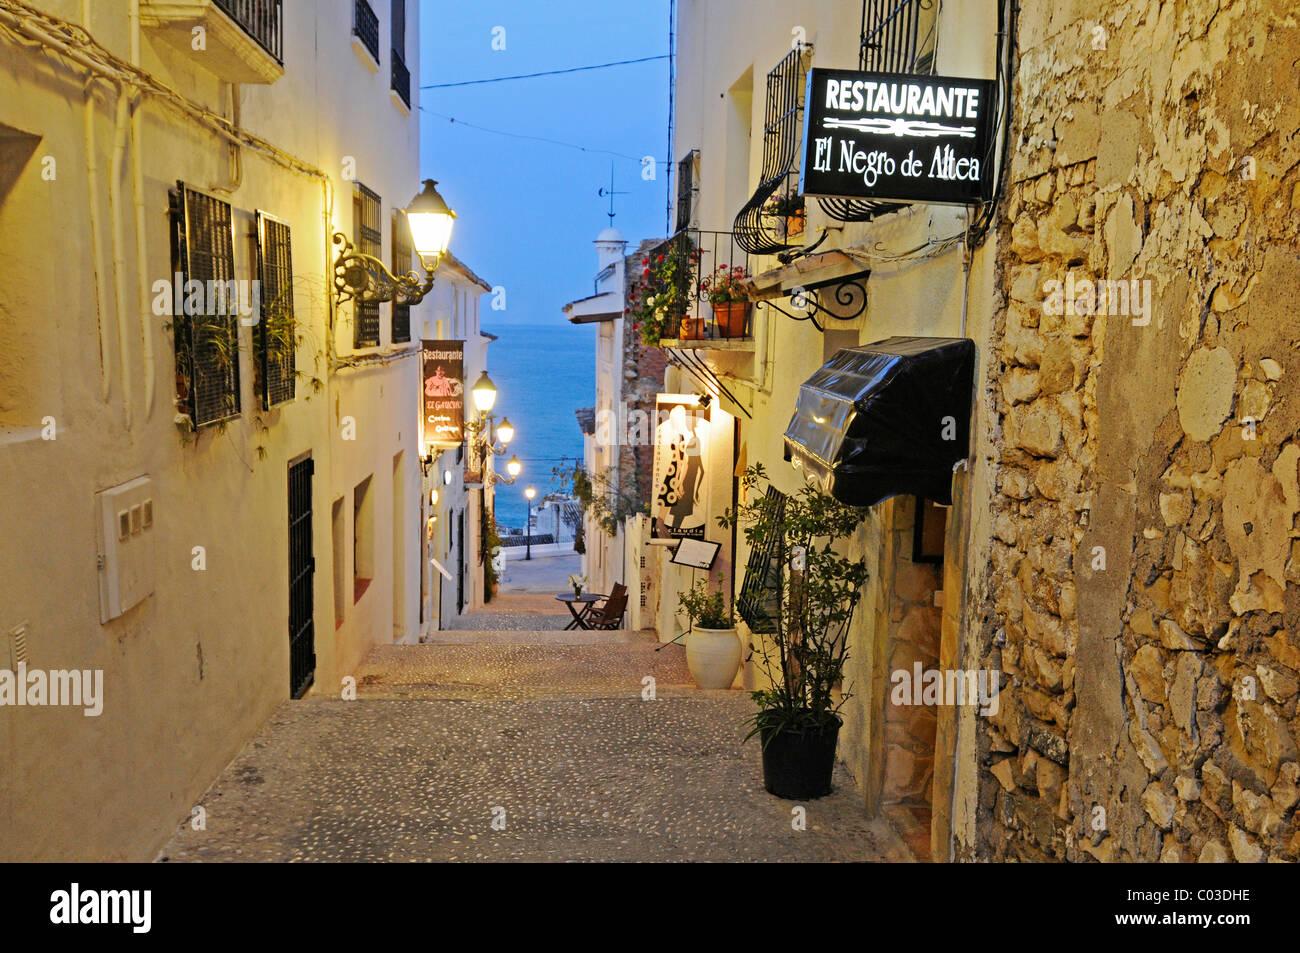 Small alleyway, lighting, sea, restaurant, historic town centre in